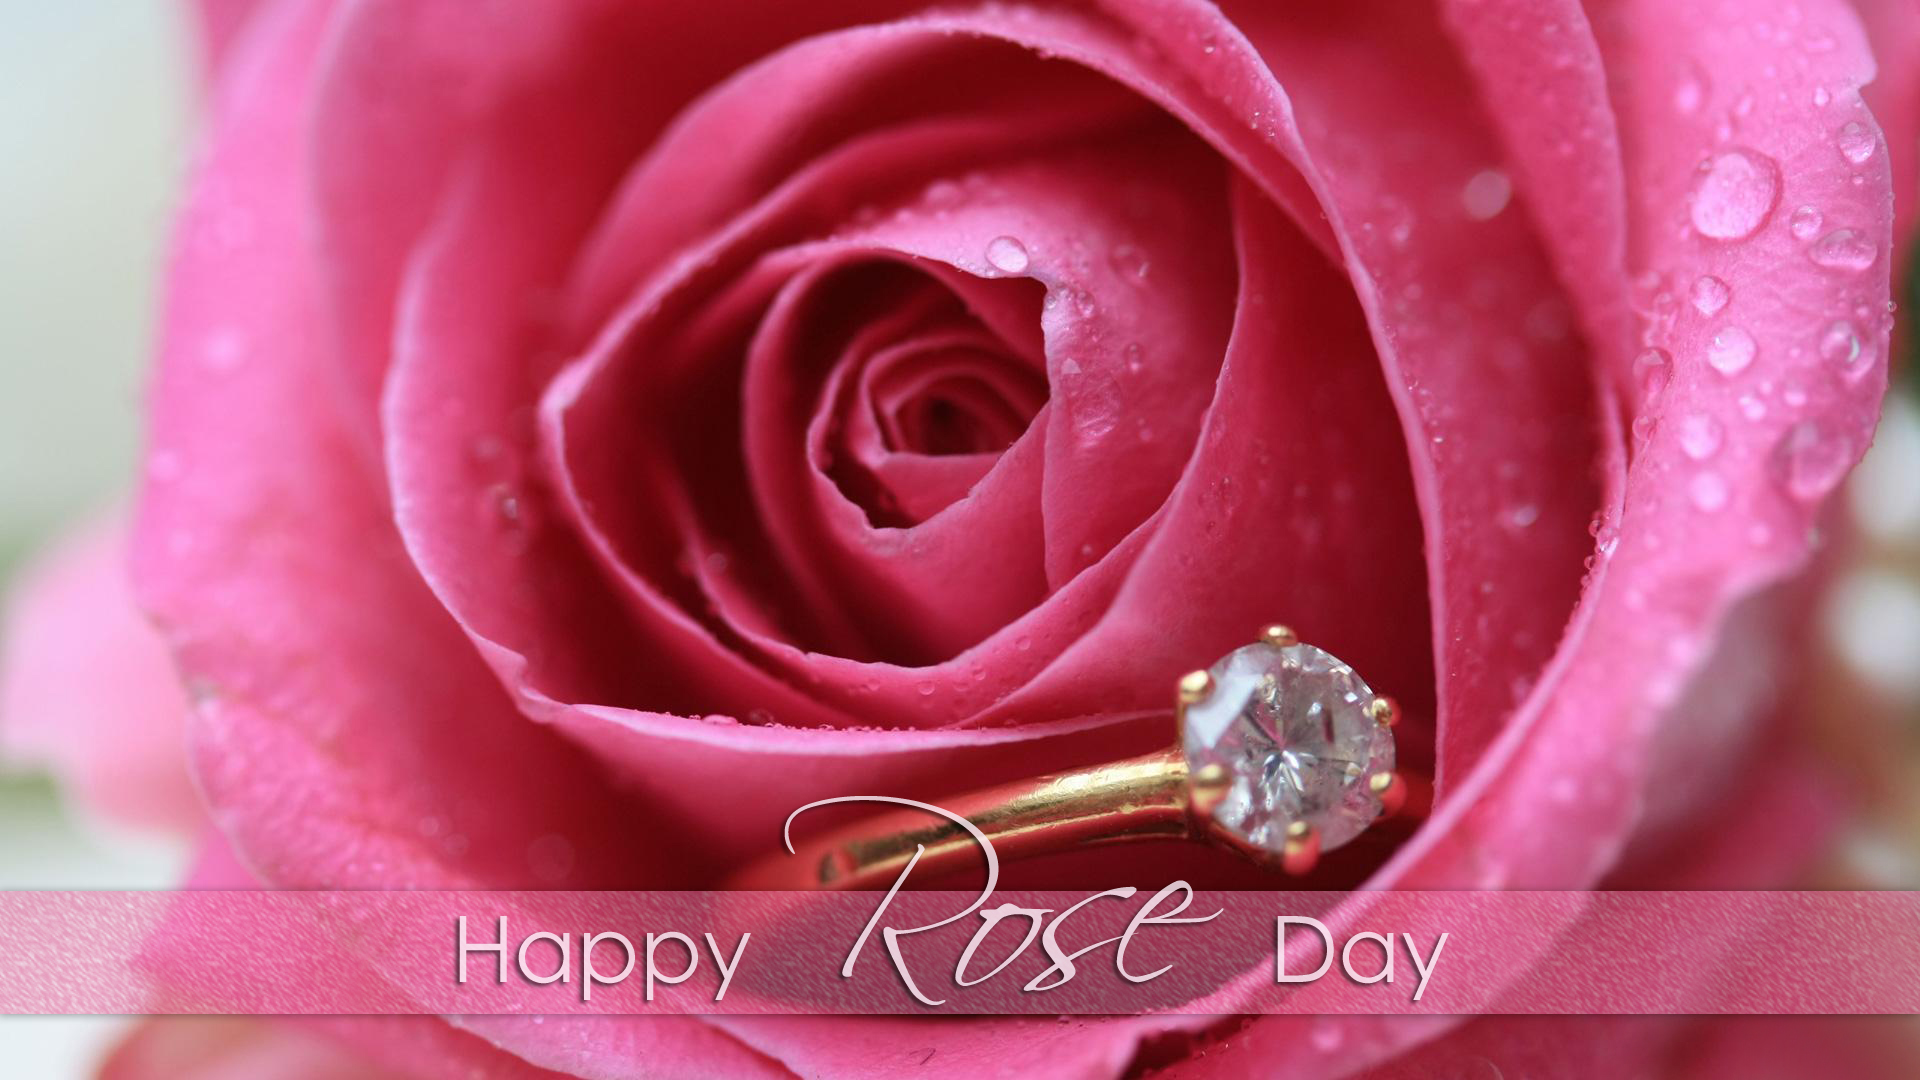 Rose day Whatsapp status & messages for whatsapp and Facebook